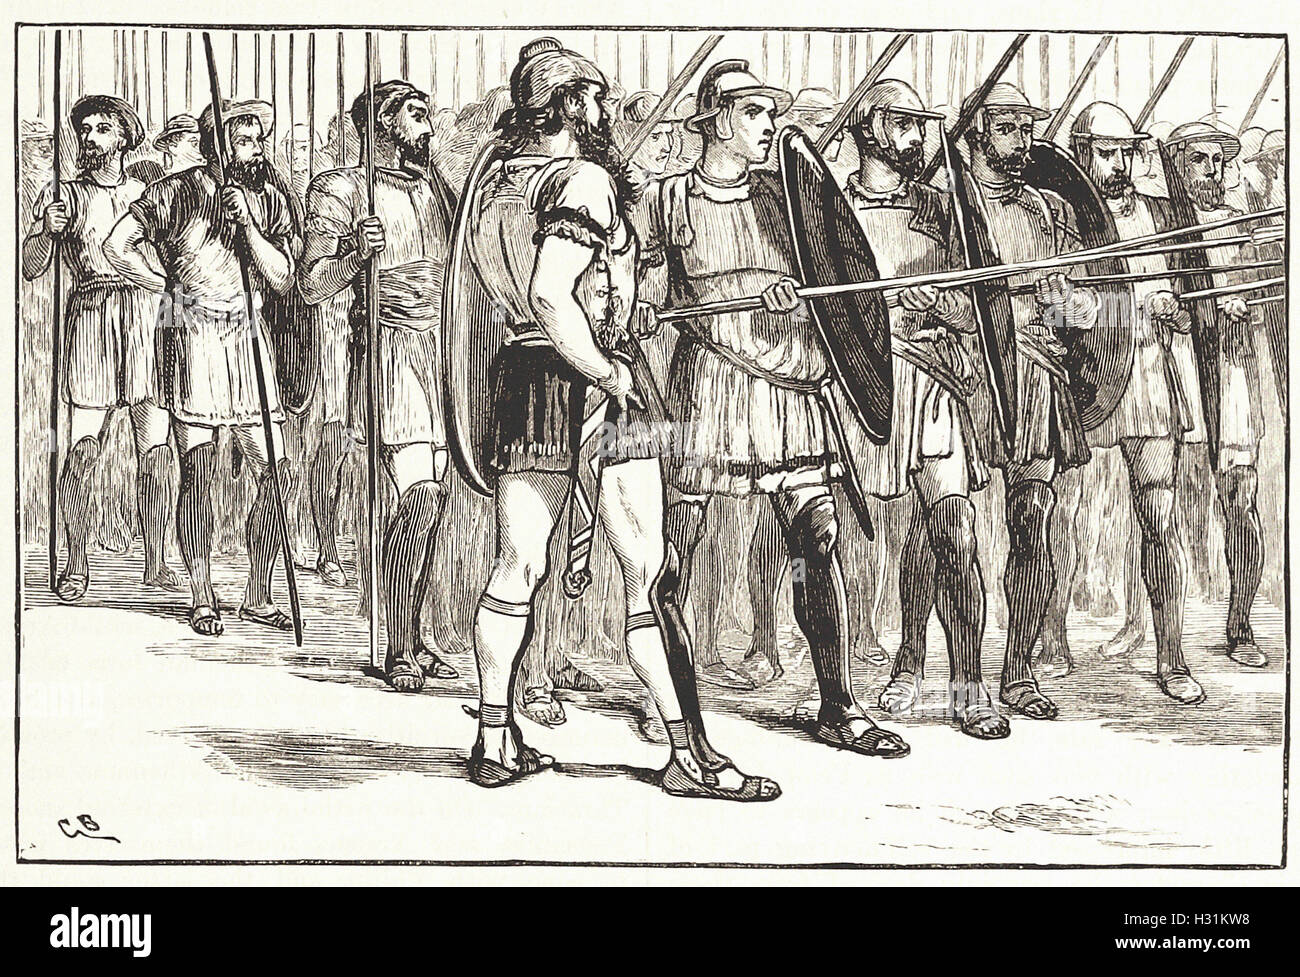 THE MACEDONIAN PHALANX - from 'Cassell's Illustrated Universal History' - 1882 Stock Photo